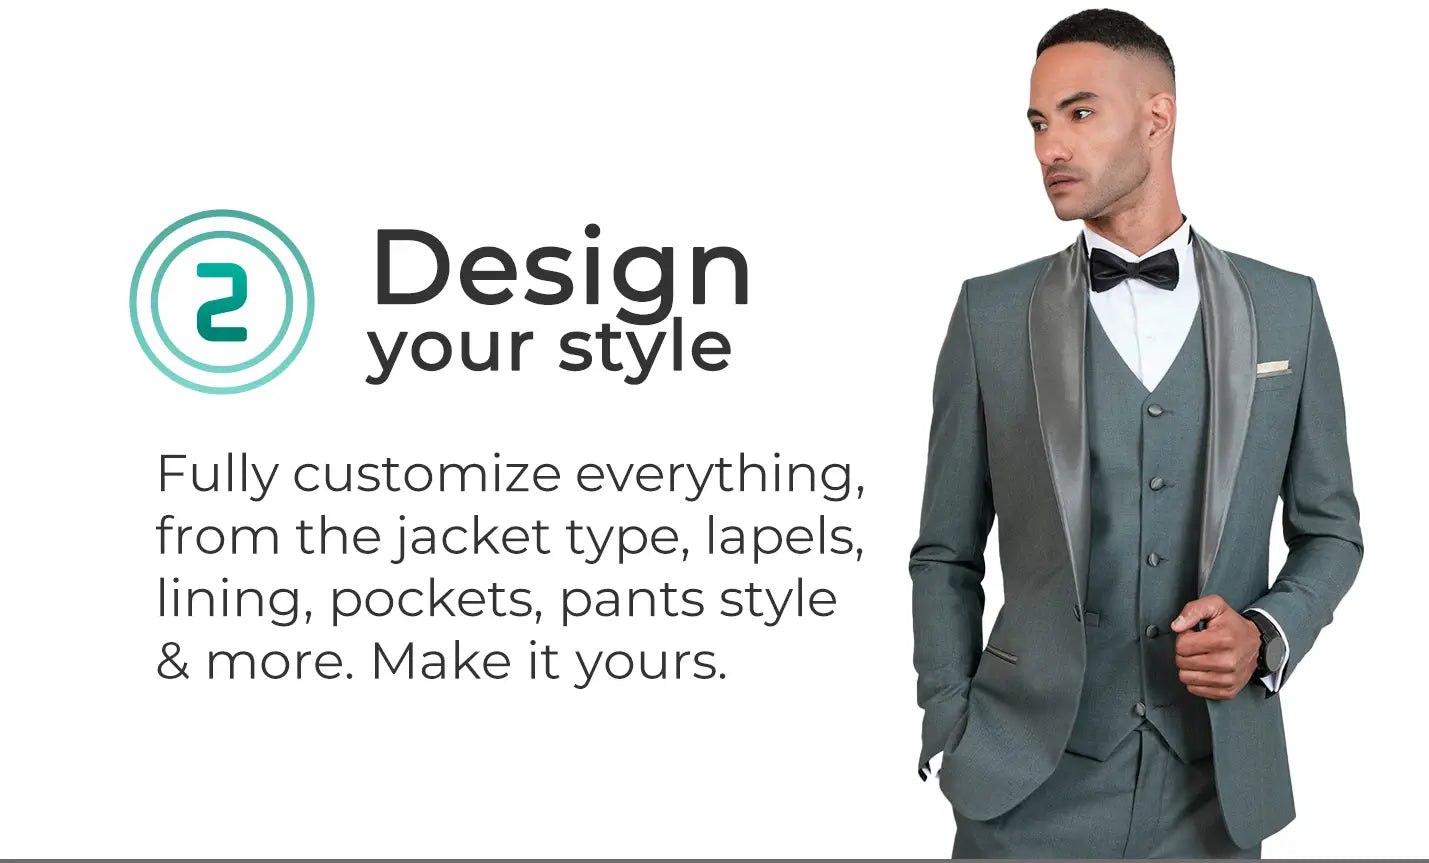 Design your style. Fully customize everything, from the jacket type, lapels, lining, pockets, pants style & more. Make it yours. Man in green tuxedo.